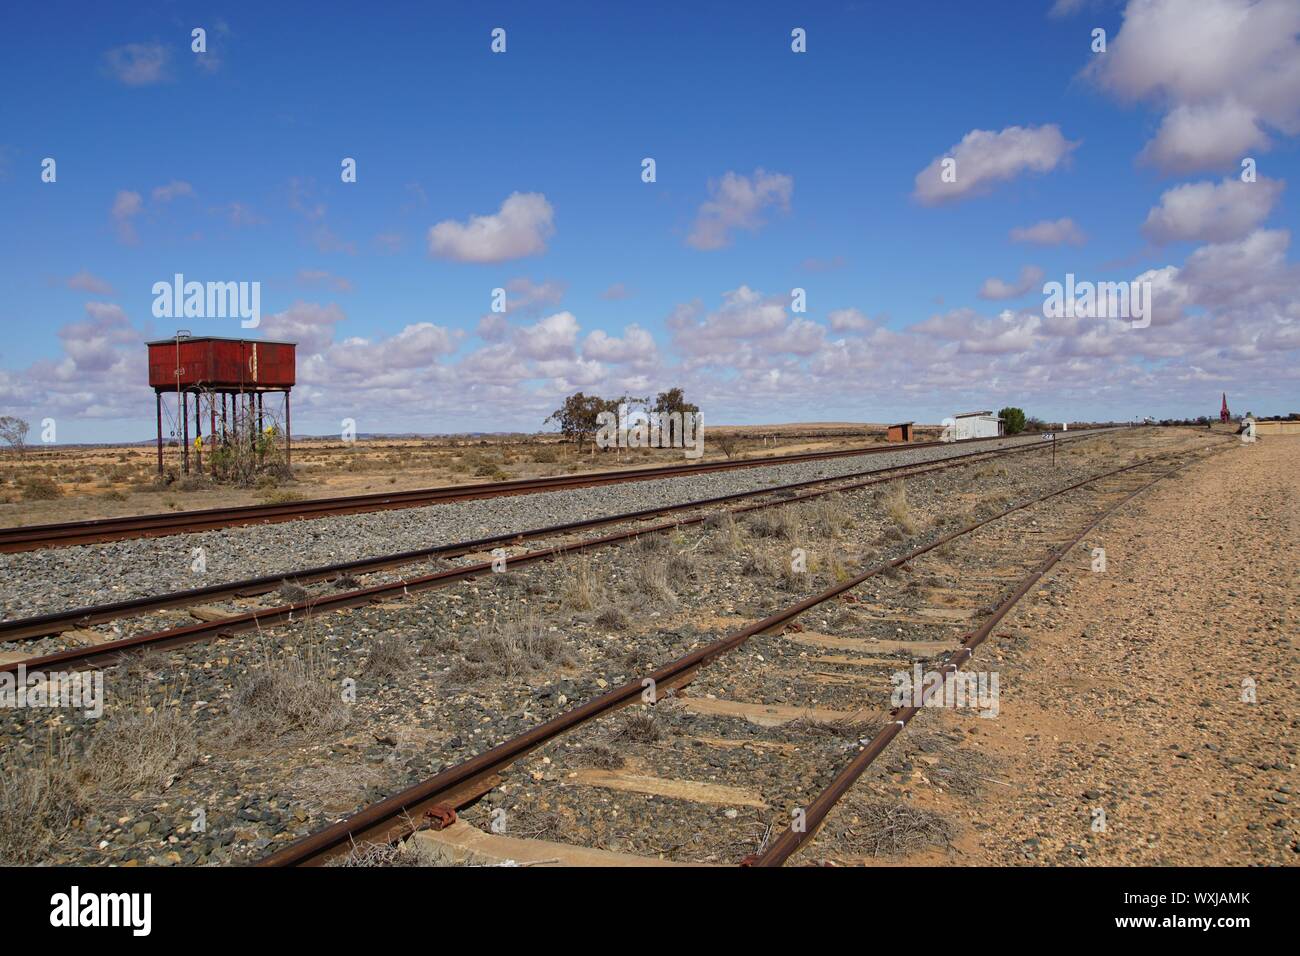 Railway Tracks running through an Outback Landscape Stock Photo